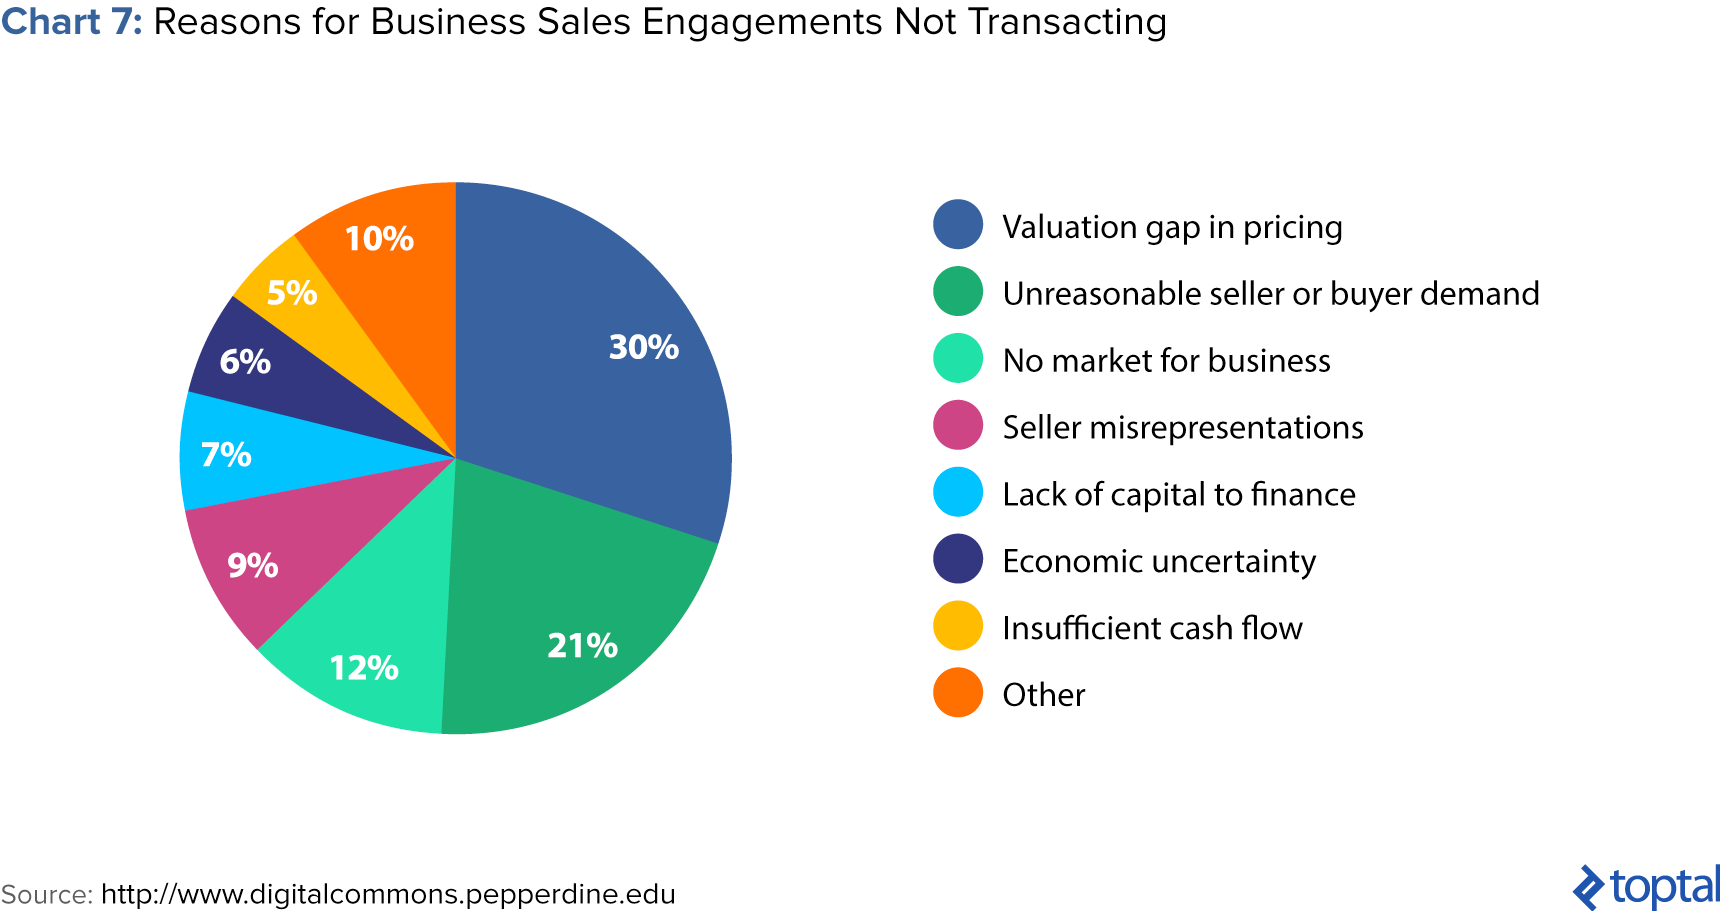 Chart 7: Reasons for Business Sales Engagements Not Transacting